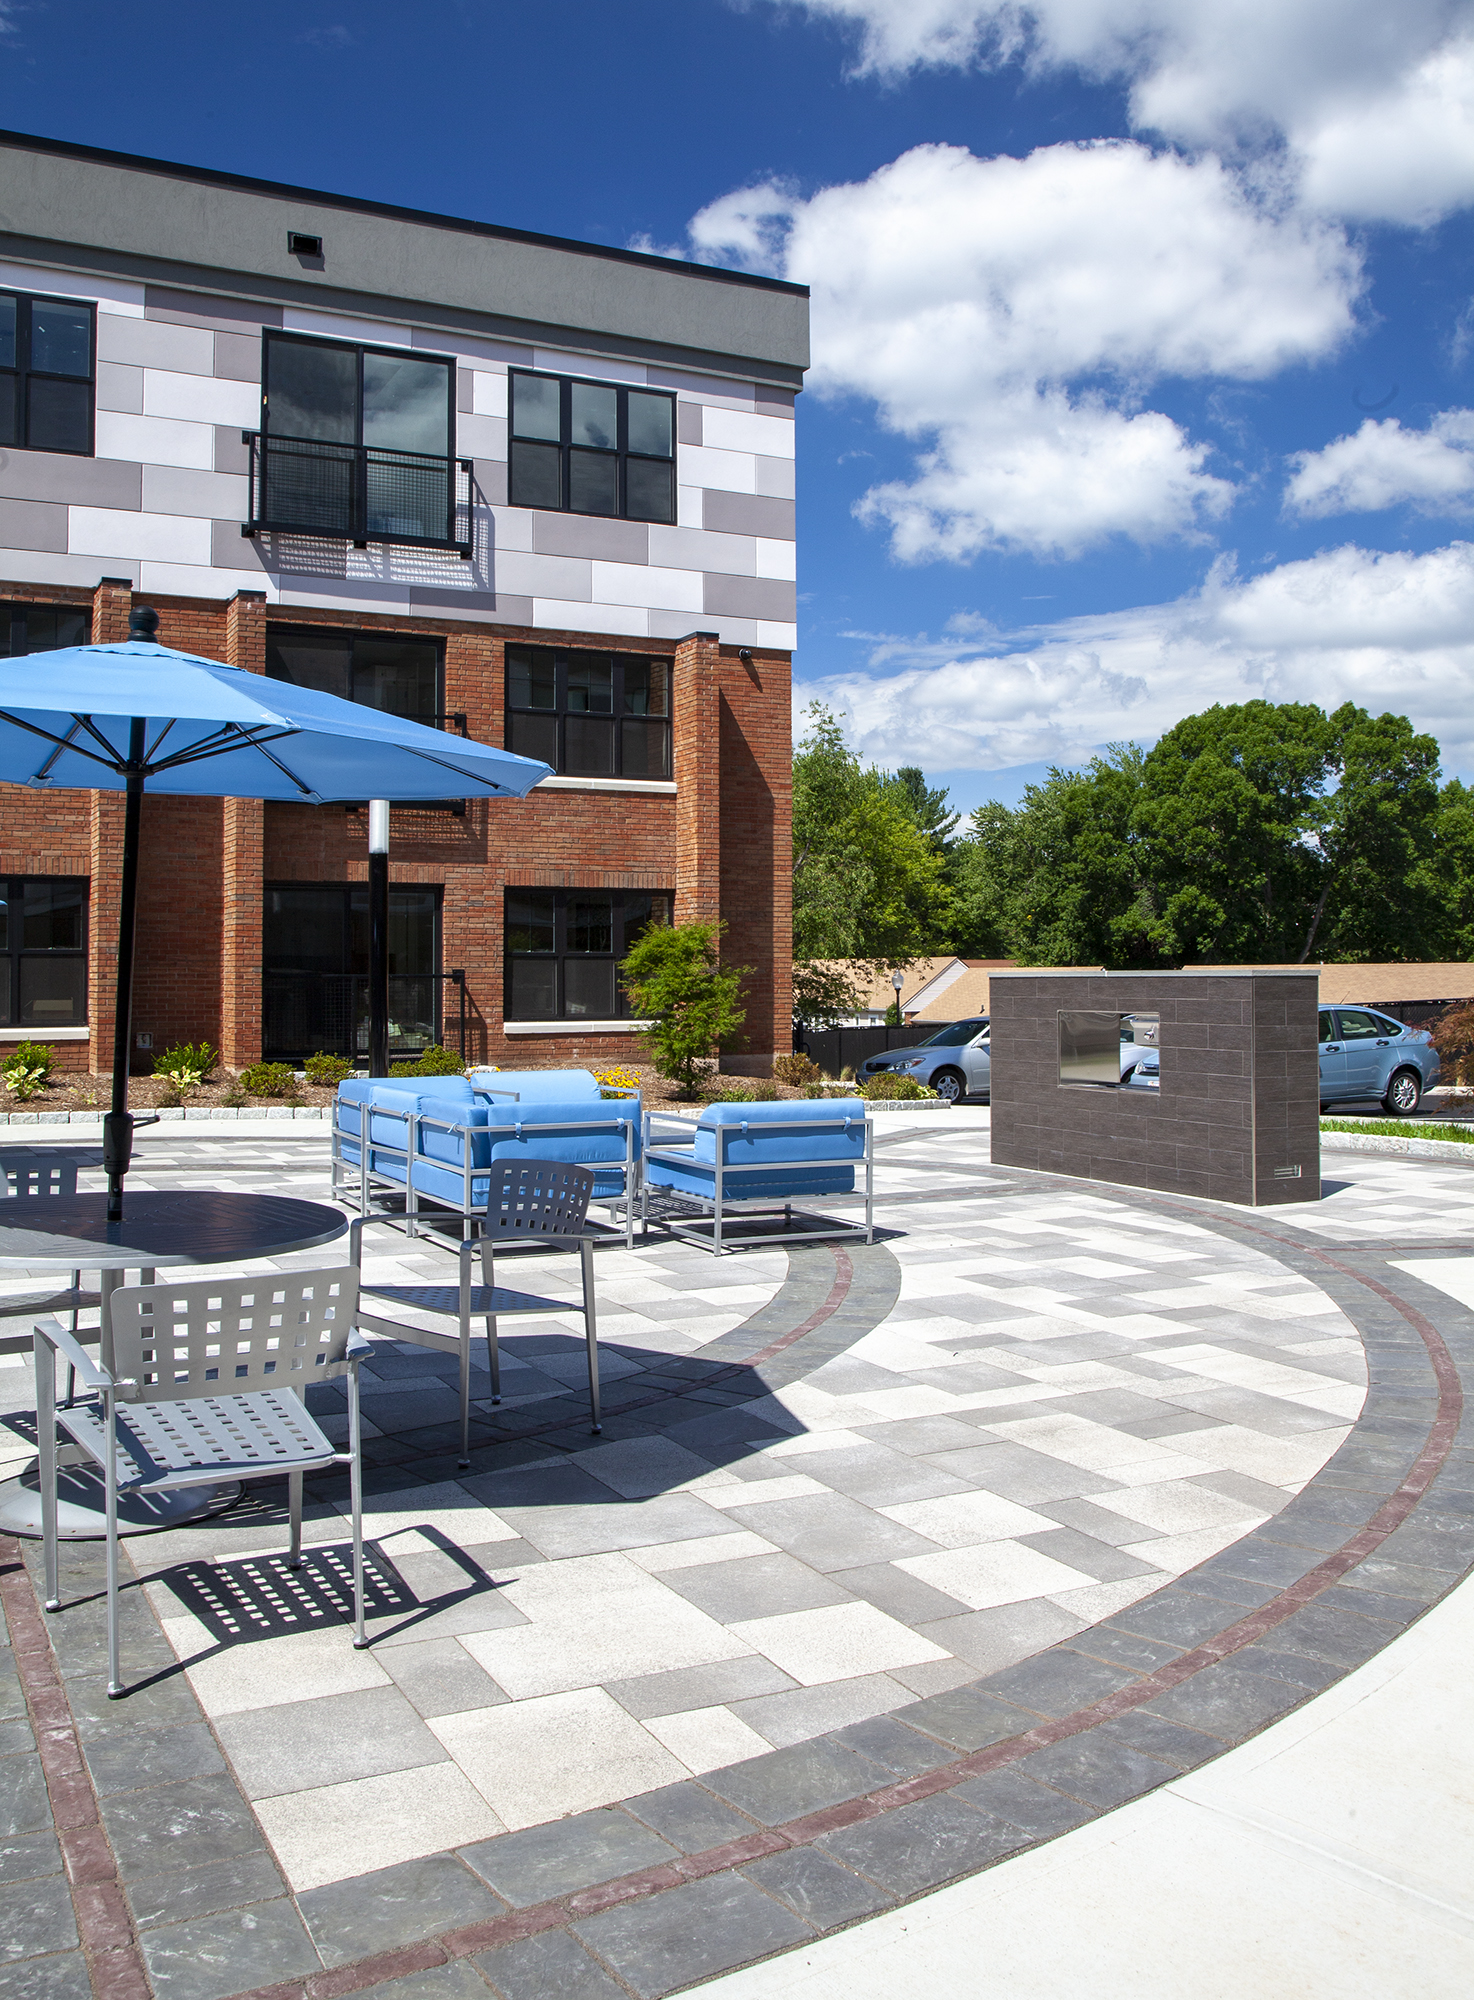 An apartment complex with an outdoor amenity space of Umbriano pavers with contrasting circular patterns of Copthorne and Richcliff.